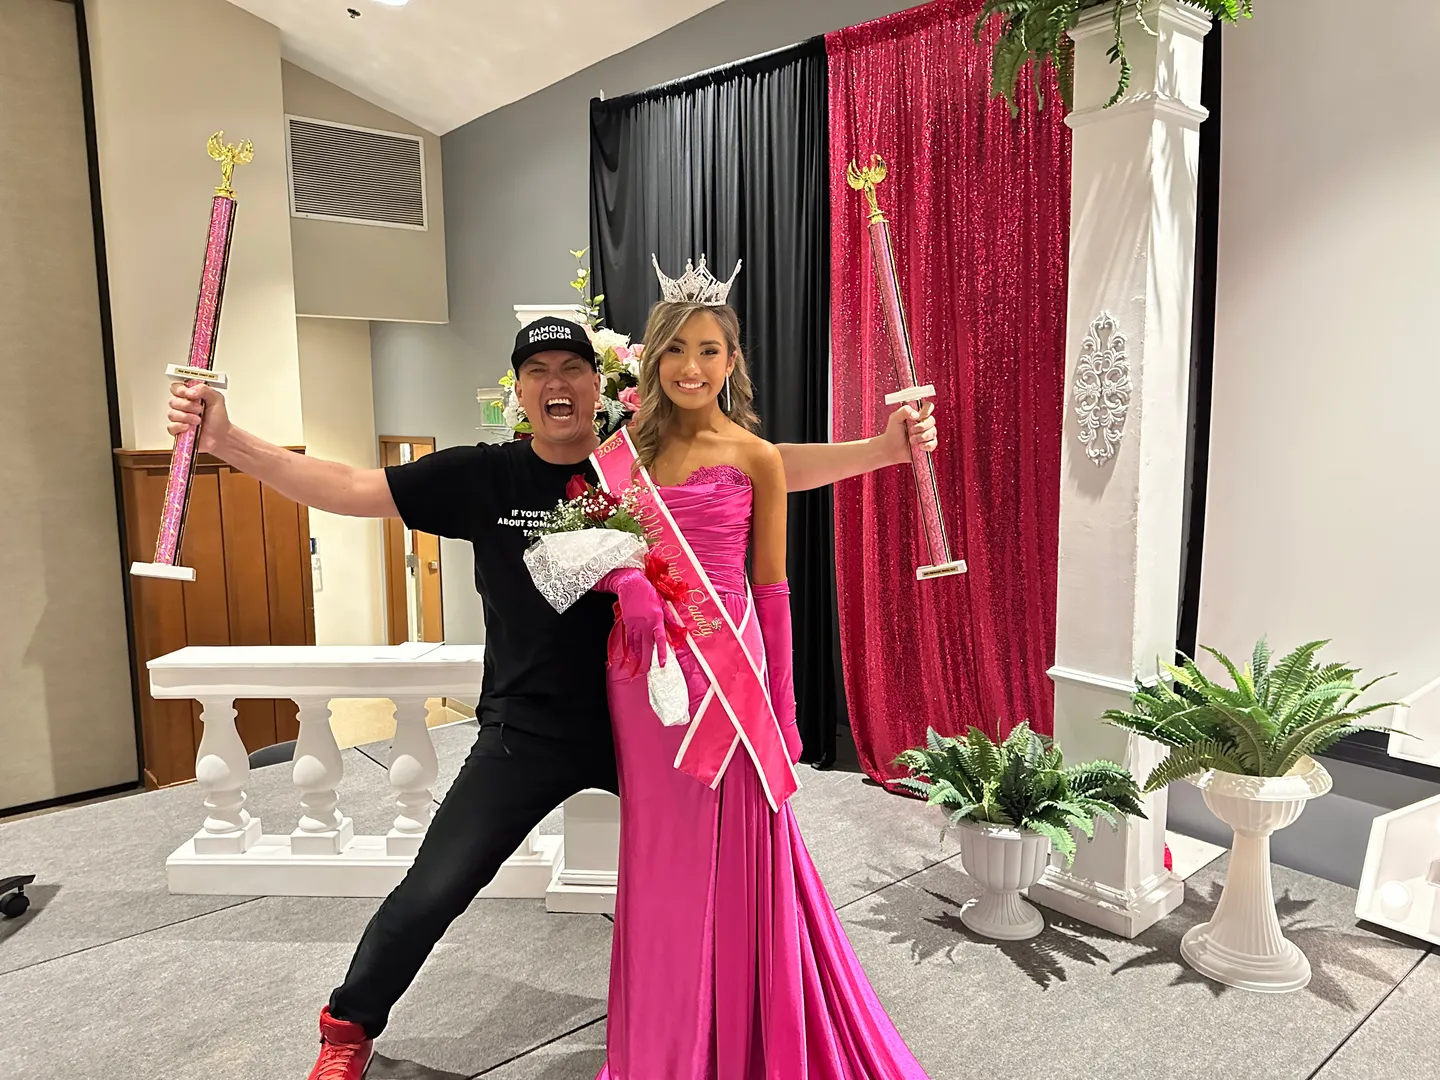 My daughter won the Miss Teen Union title.  First pageant ever. No prior experience, no prior training.  Decided she wanted to do it, did it, and CRUSHED IT! 

This is relevant to so many things in my life. I’ve “wanted” to do a lot of things in life, but due to fear, feeling unqualified, etc. I didn’t go for it.  

This is my reminder to you (and myself) that if you have it on your heart to do something, GO FOR IT!   

🤙🏽

- Joey